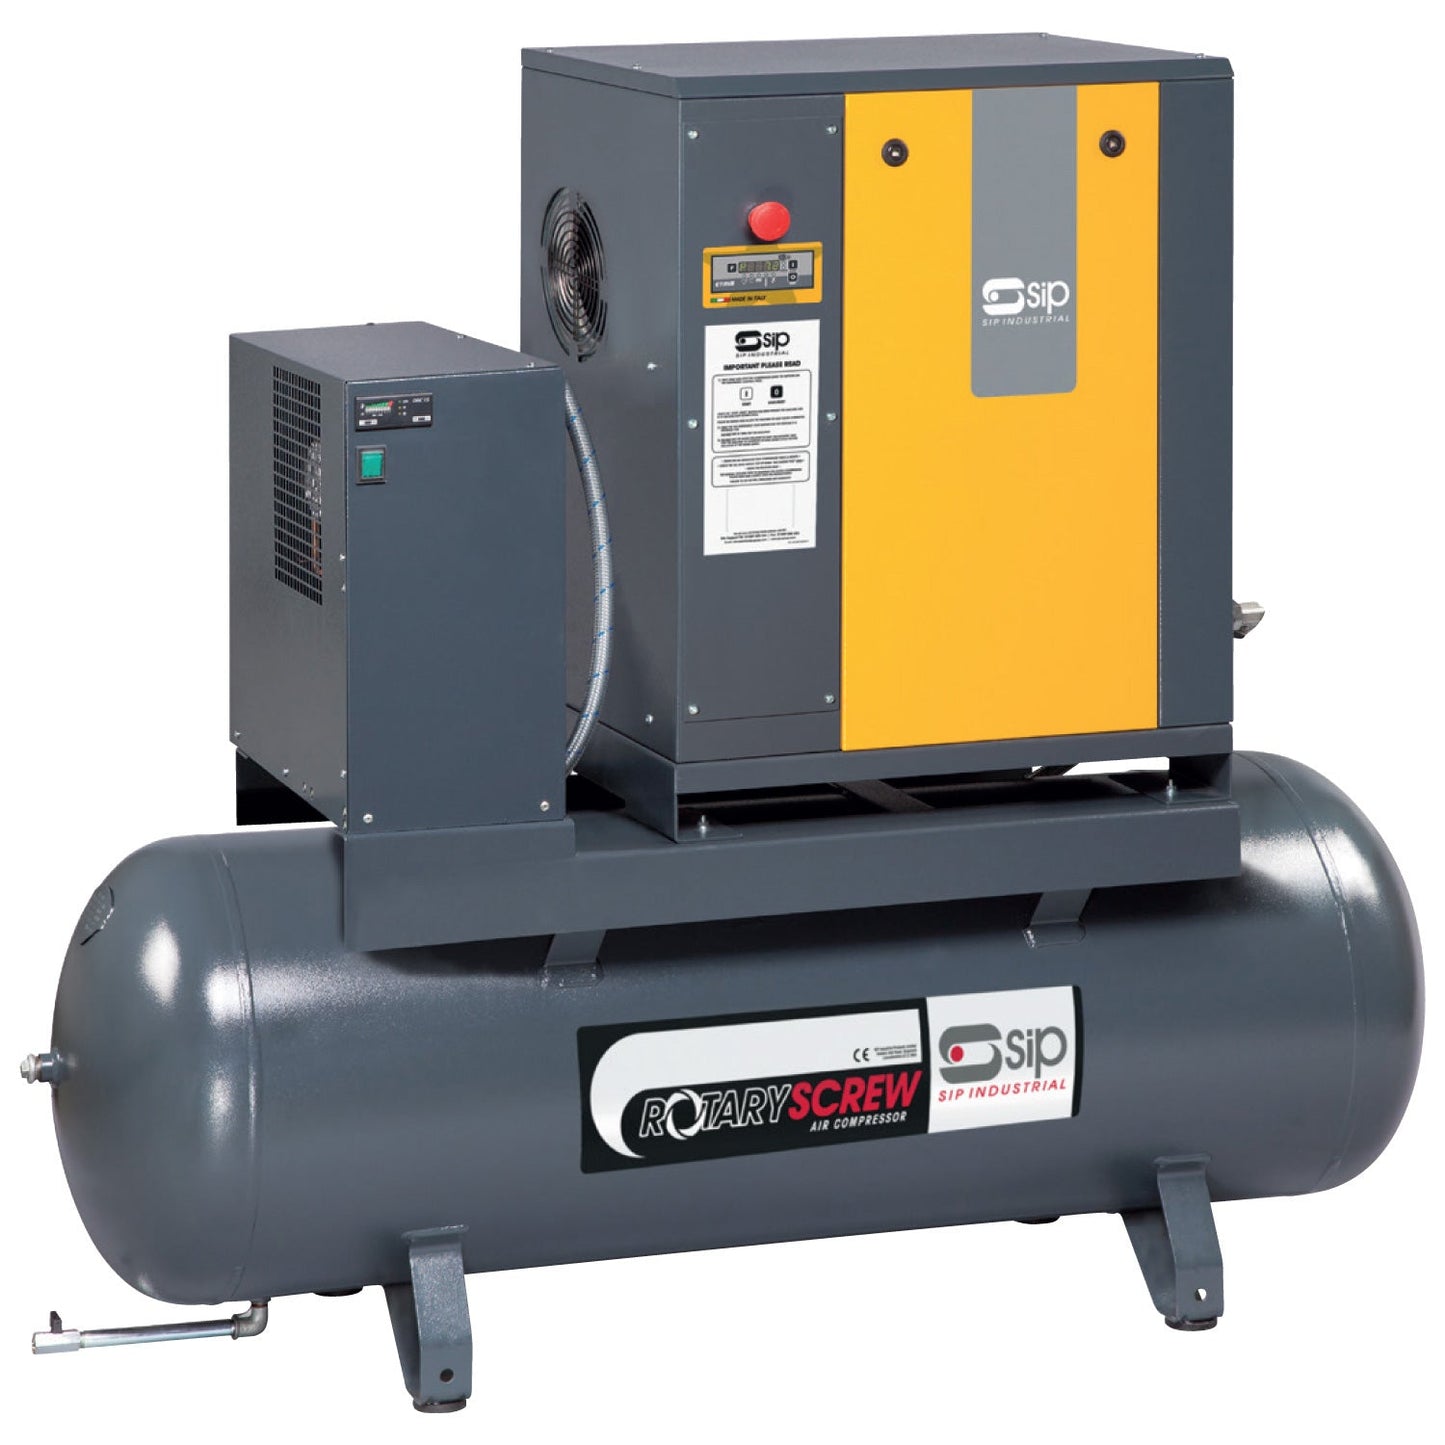 SIP RS5.5-08-270BD/RD 270ltr Rotary Screw Compressor with Dryer, Sip Industrial